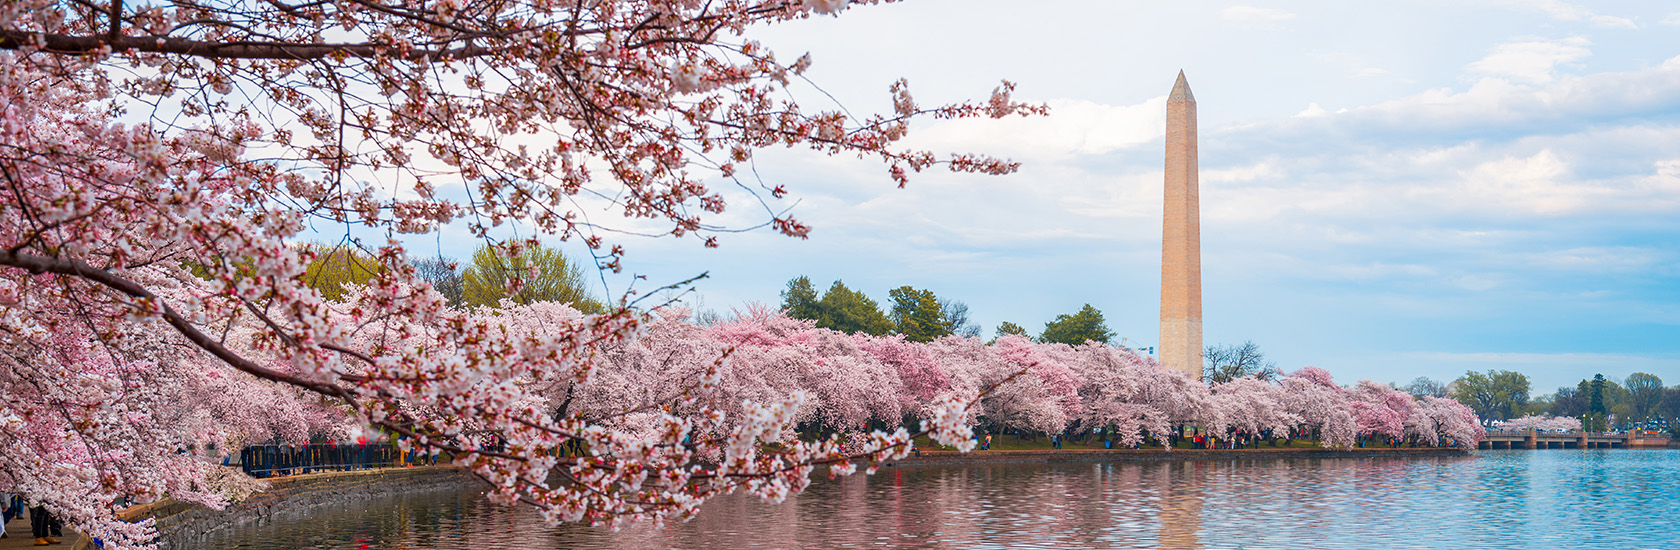 Cherry blossom tree with monument